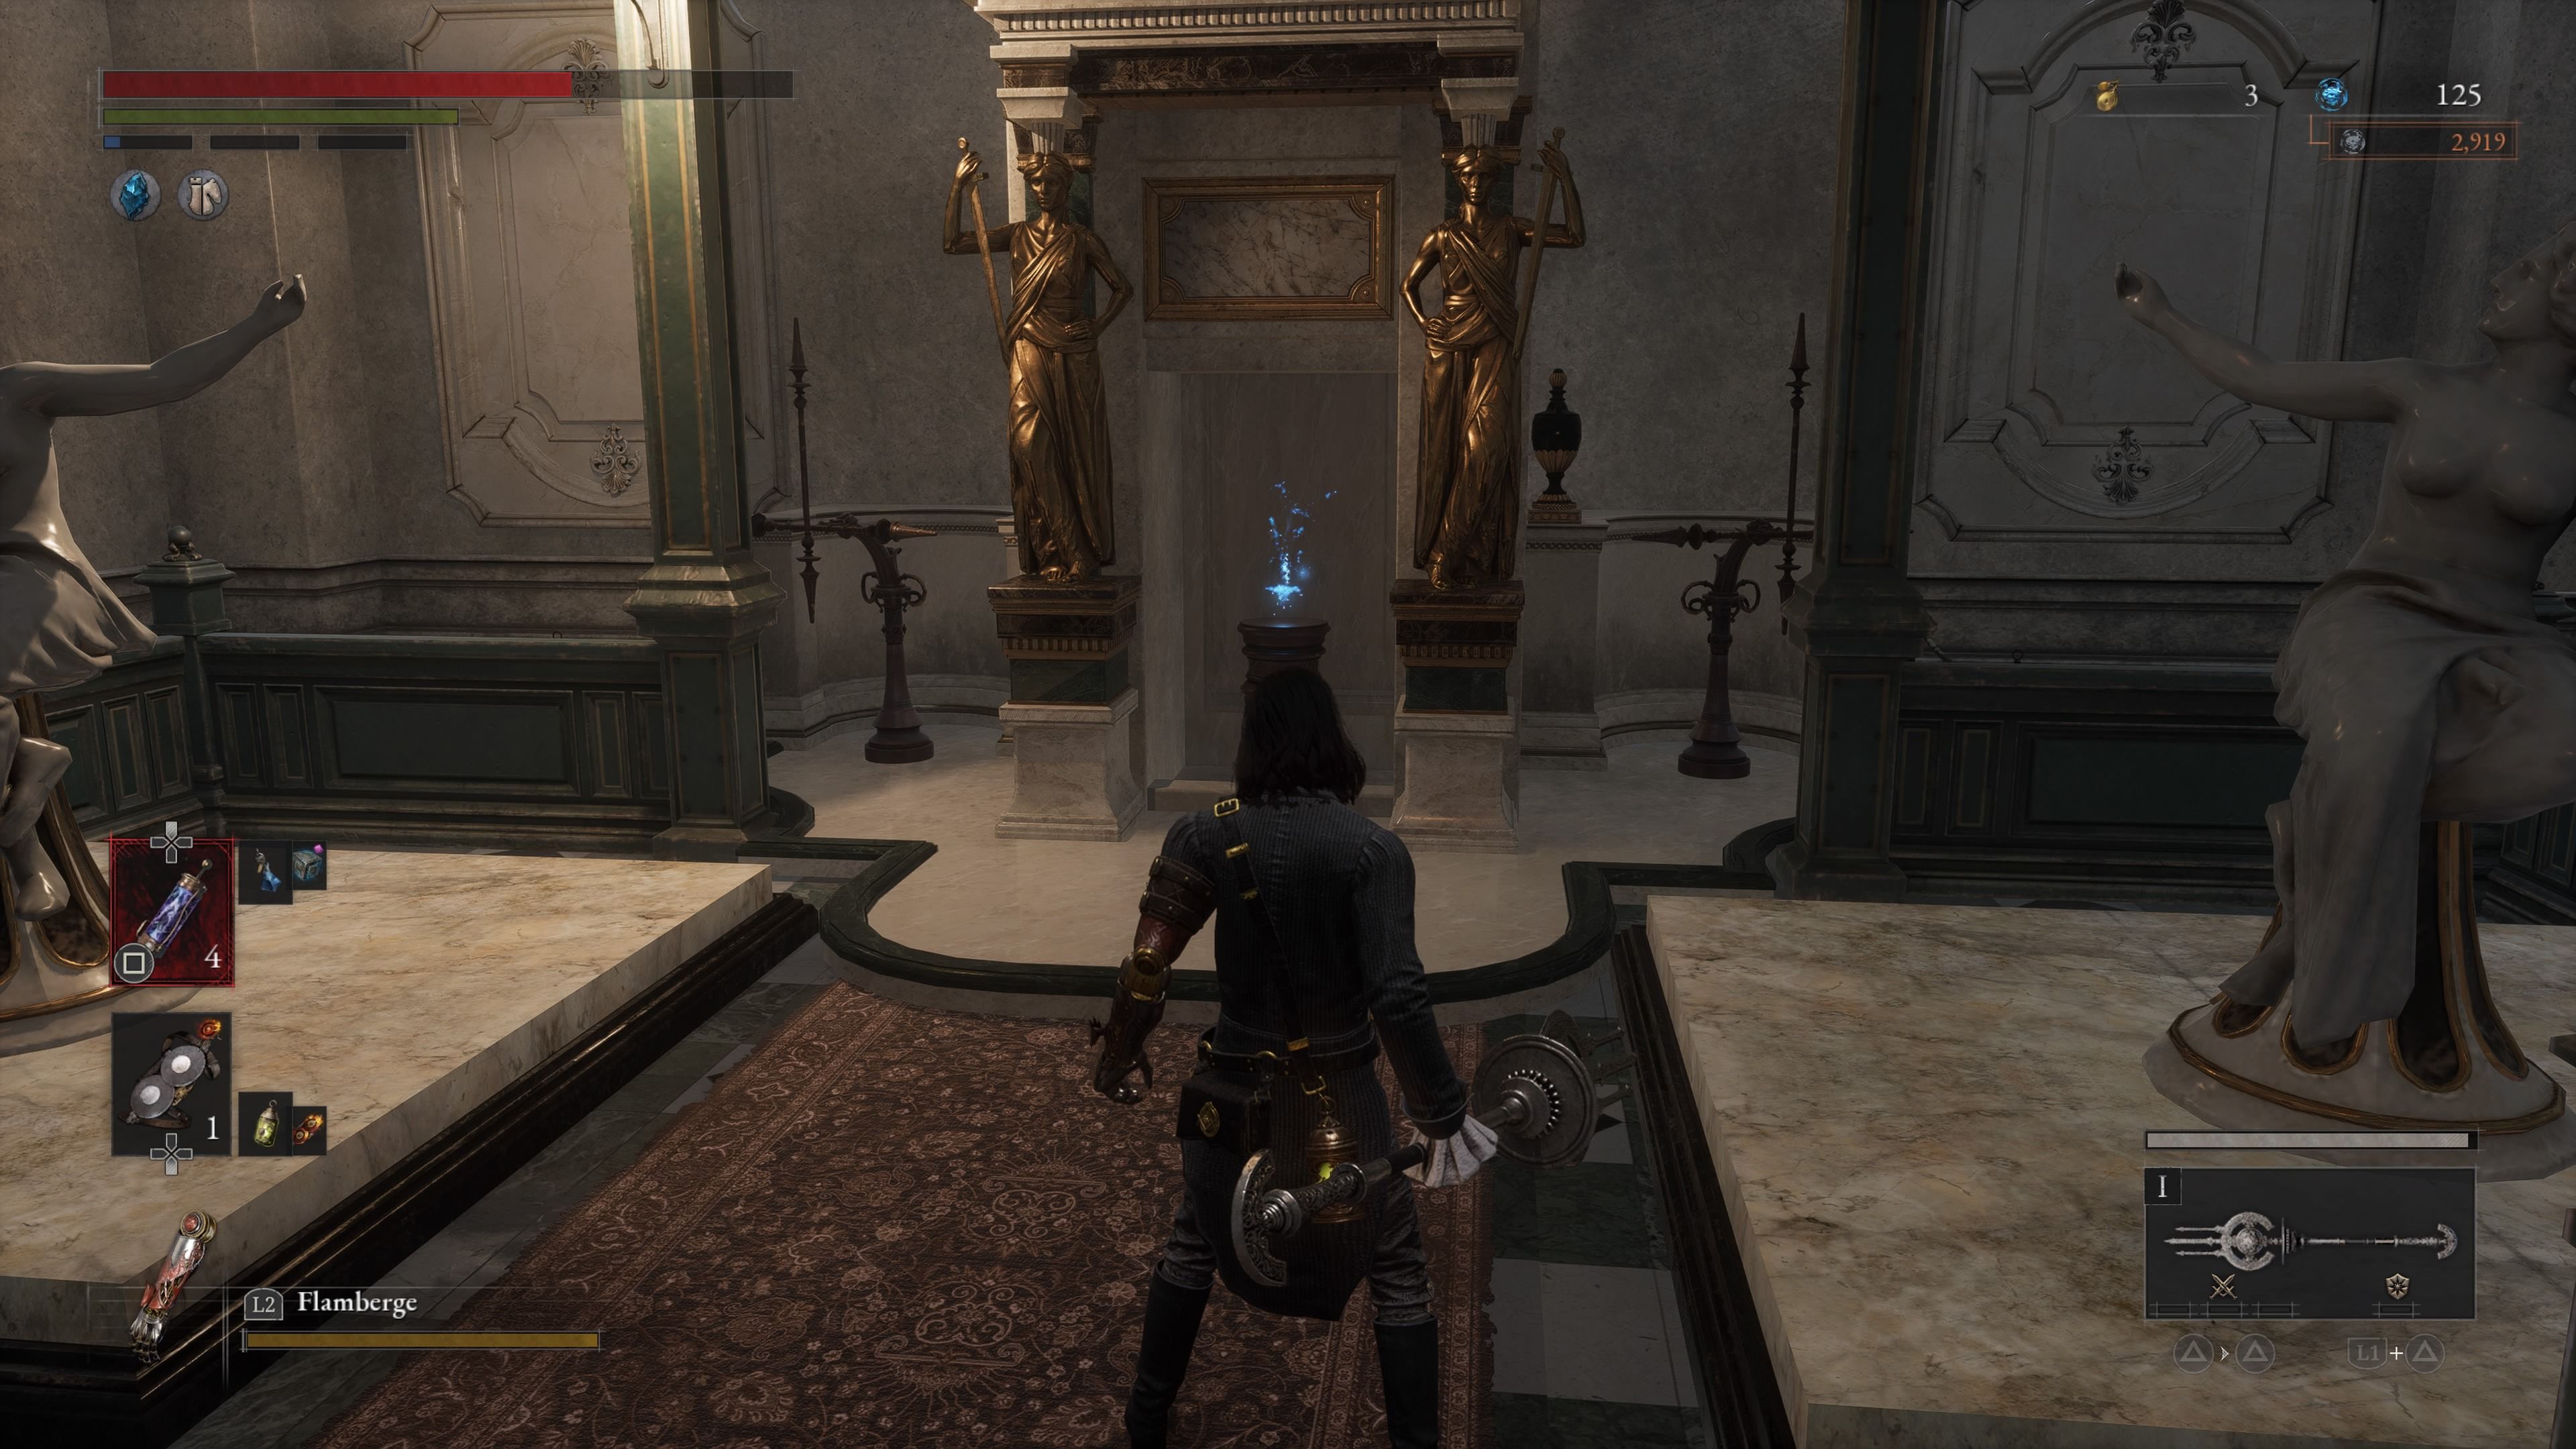 The statue room hatch opening up to reveal a Trinity Key in Lies of P